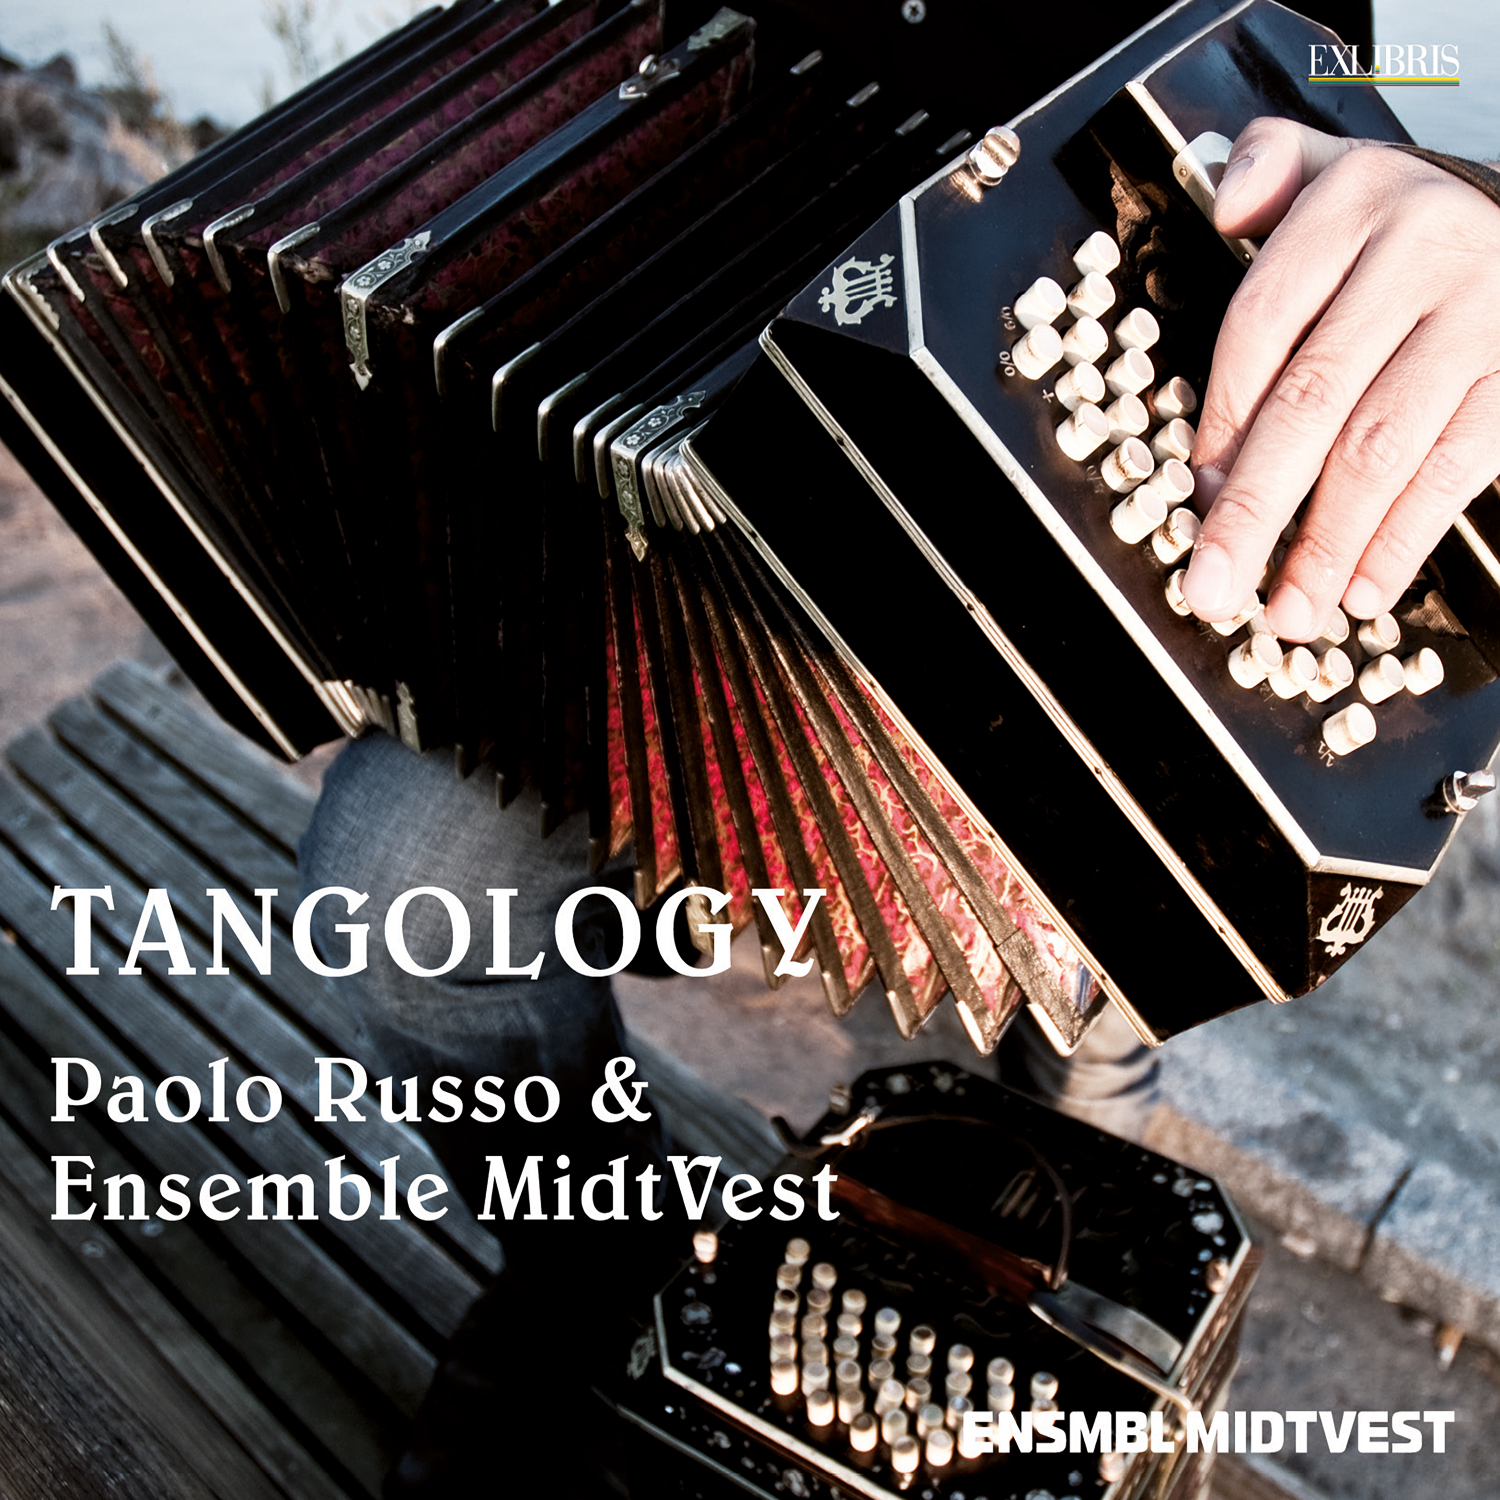 PAOLO RUSSO - Paolo Russo & Ensemble MidtVest : Tangology cover 